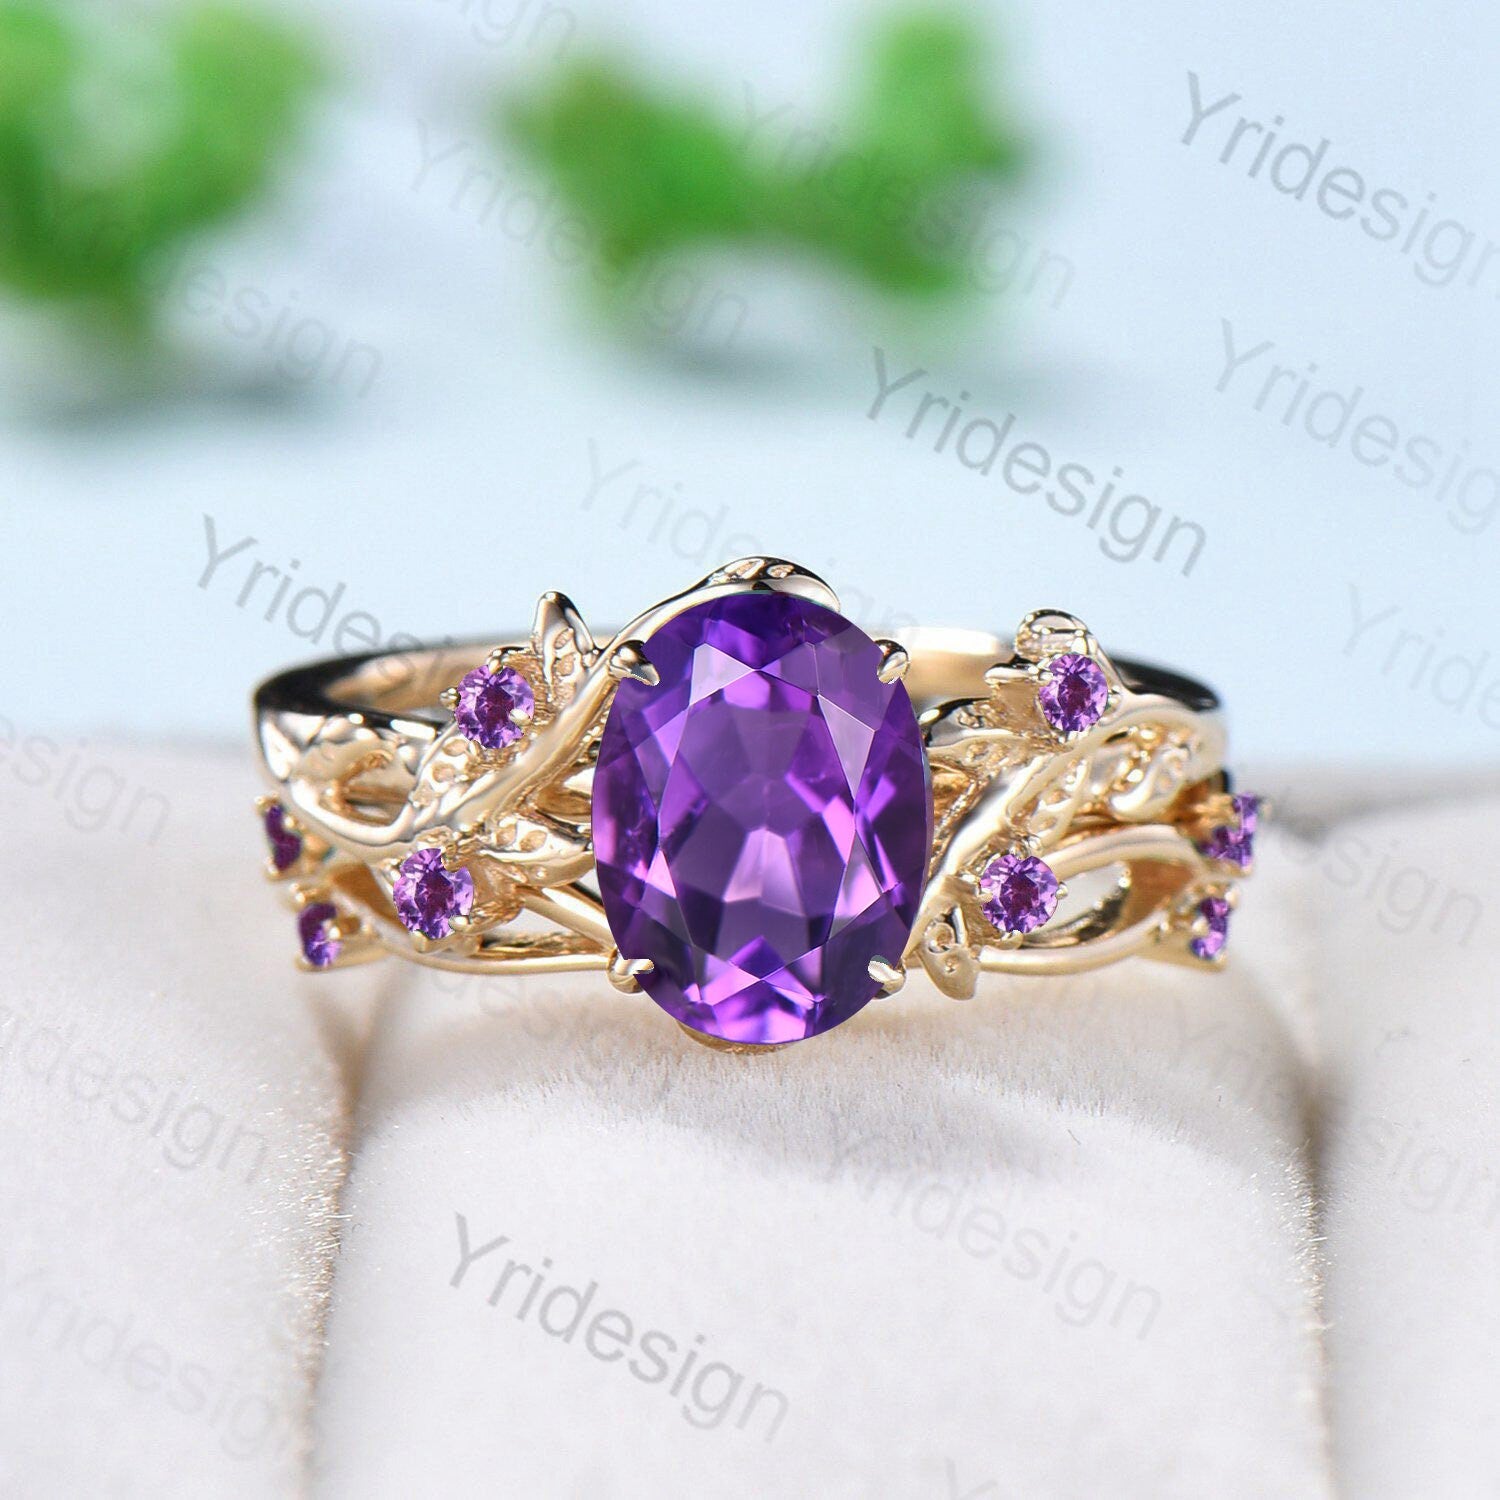 Earth Gems Jewelry Amethyst Ring Sterling Silver Rings Design Ring  Statement Ring for Men - Walmart.com